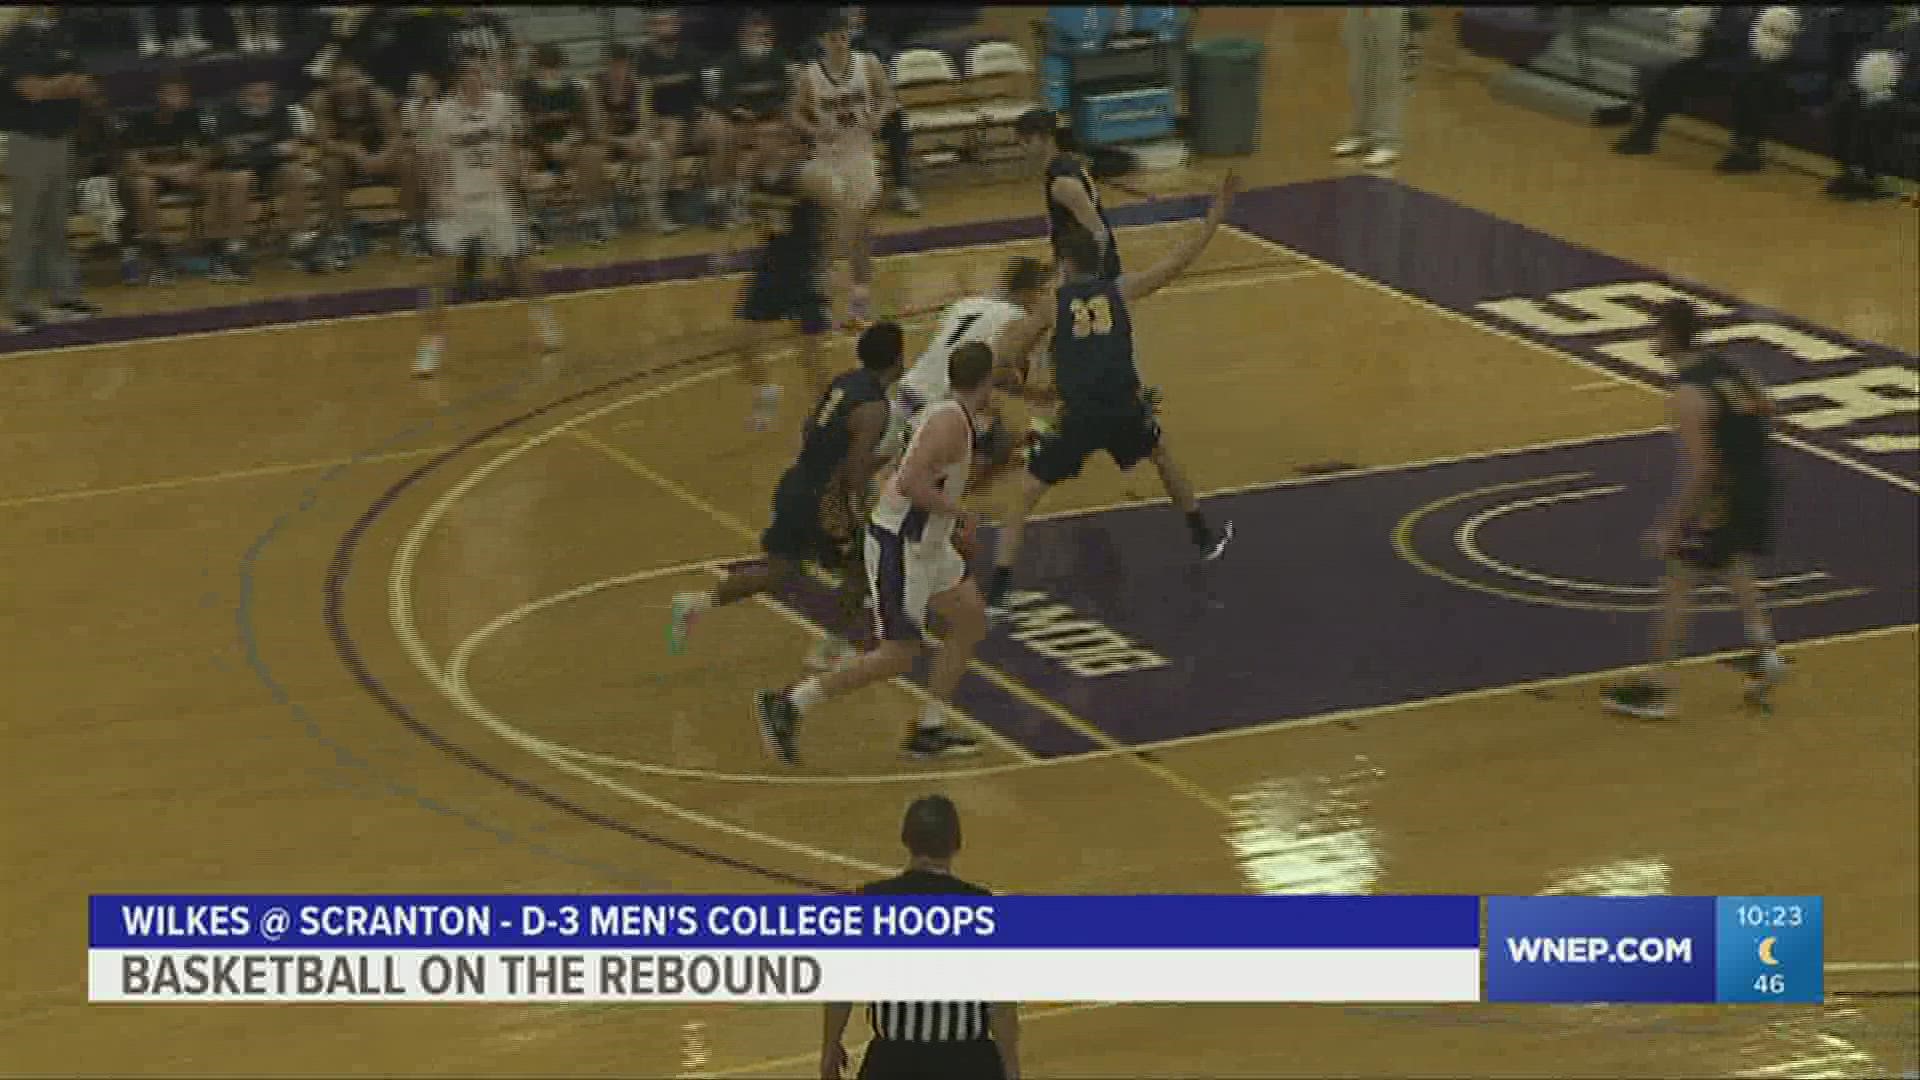 Scranton welcomed Wilkes in D3 Men's college basketball.  Royals got 20 points from Jackson Danzig in their 100-72 win.